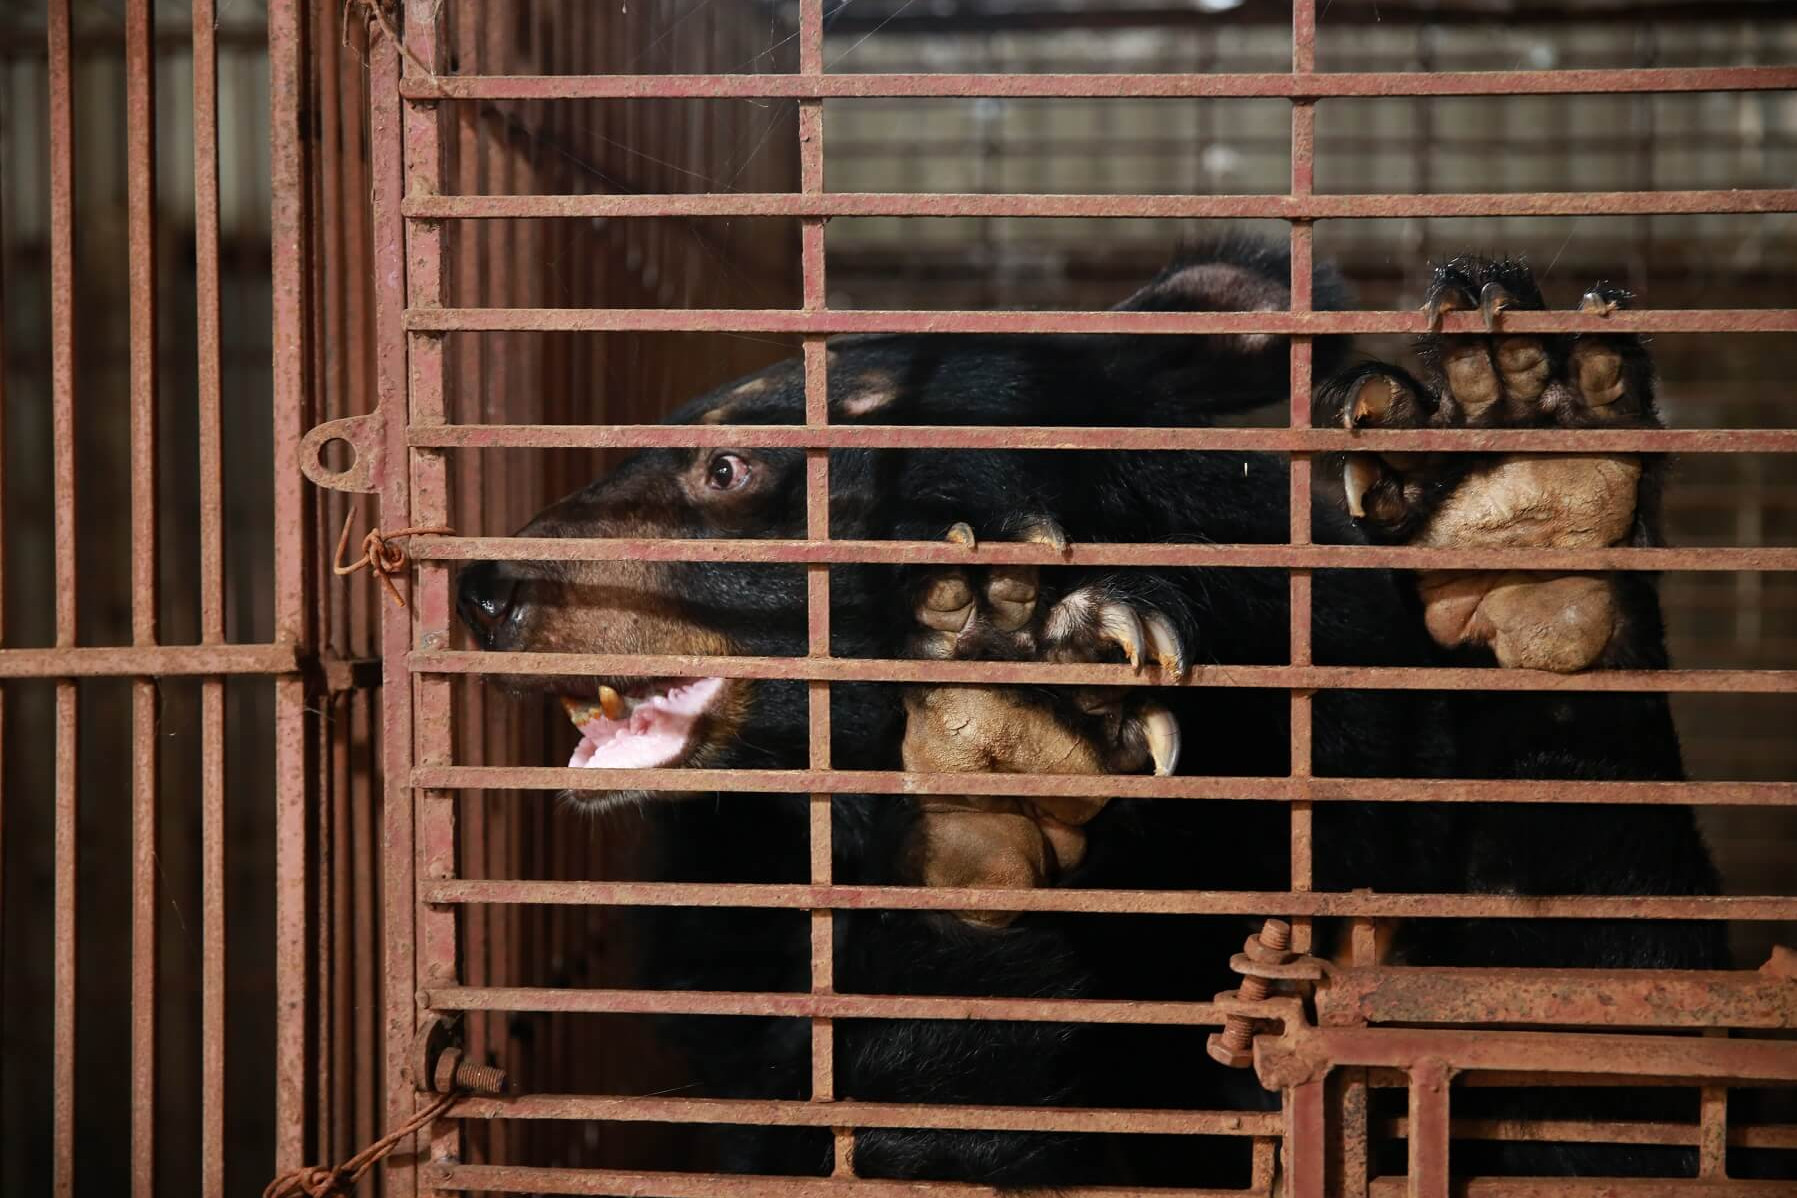 Bear in a cage Vietnam